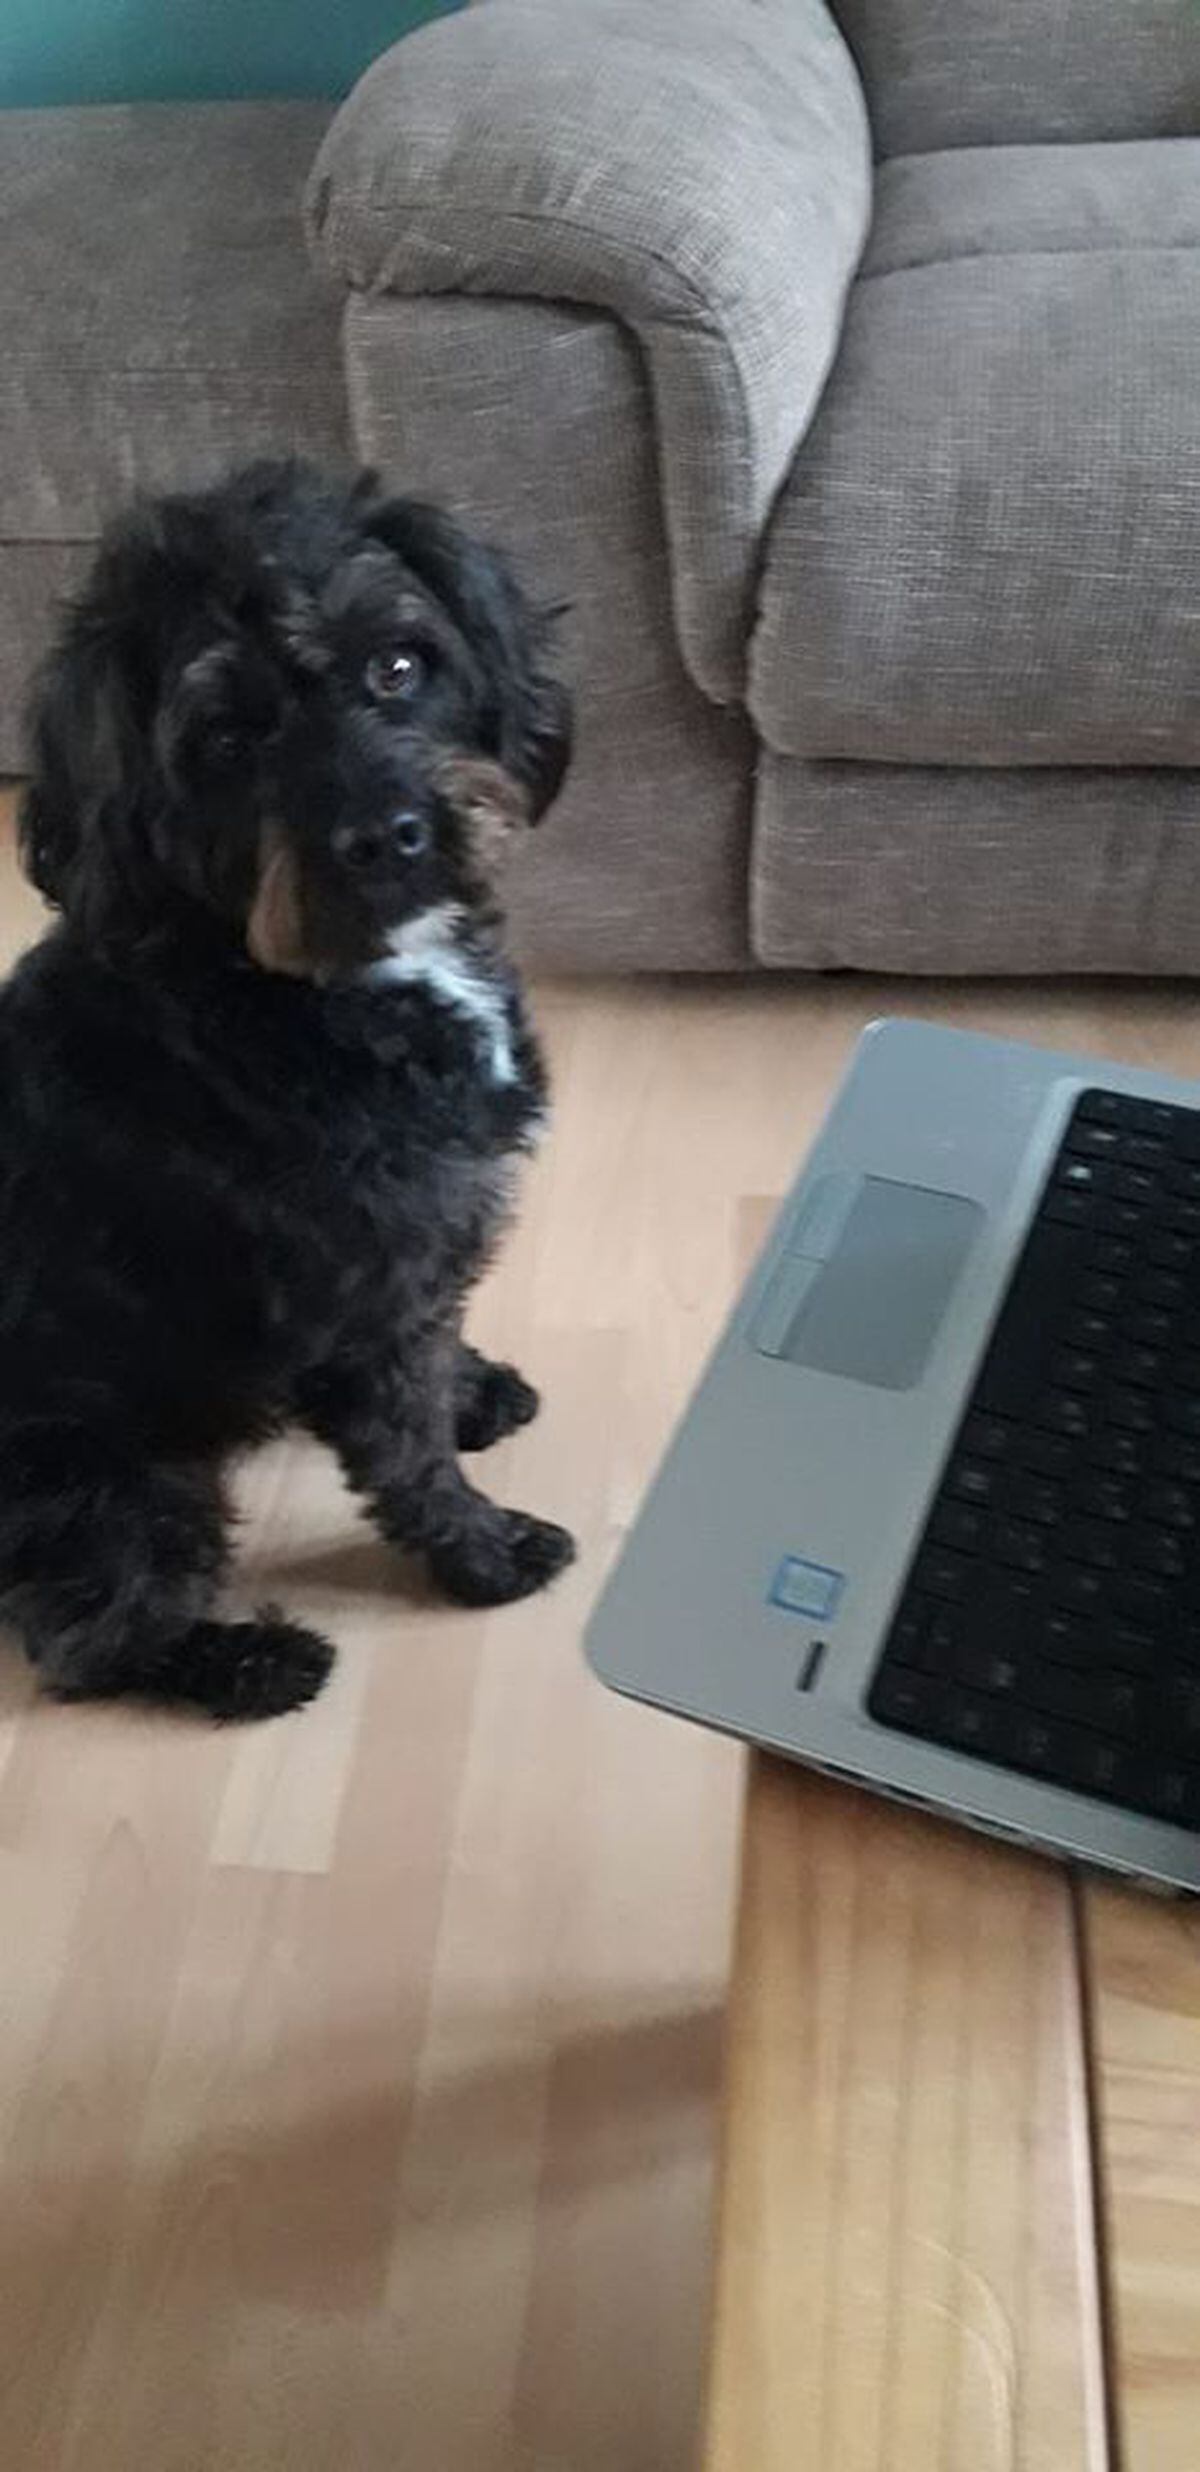 Tux working from home with his owner Netty, Dudley